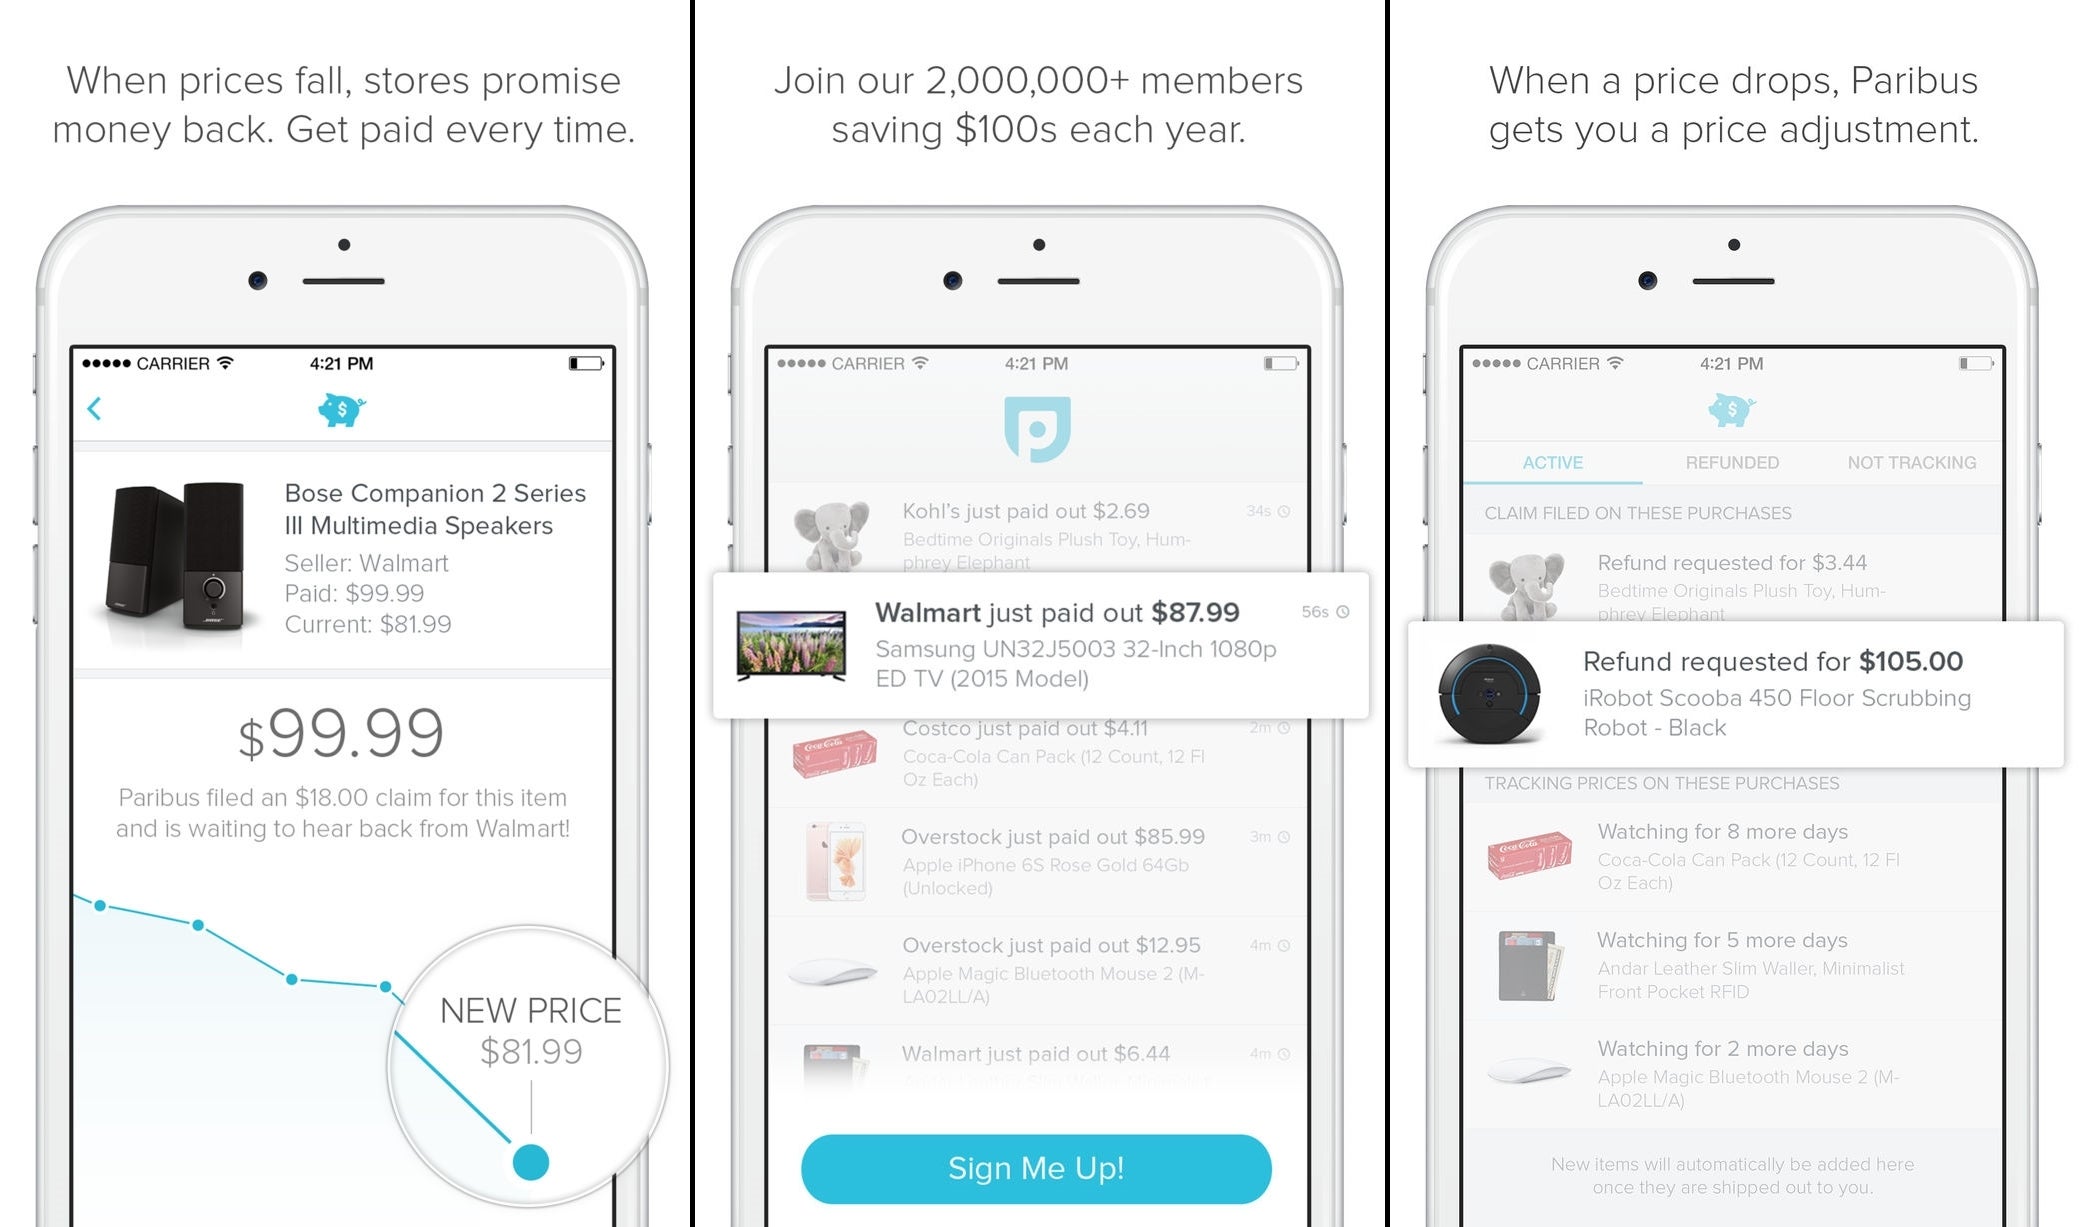 Bargain hunters, use these apps to find deals, coupons, and get cashbacks